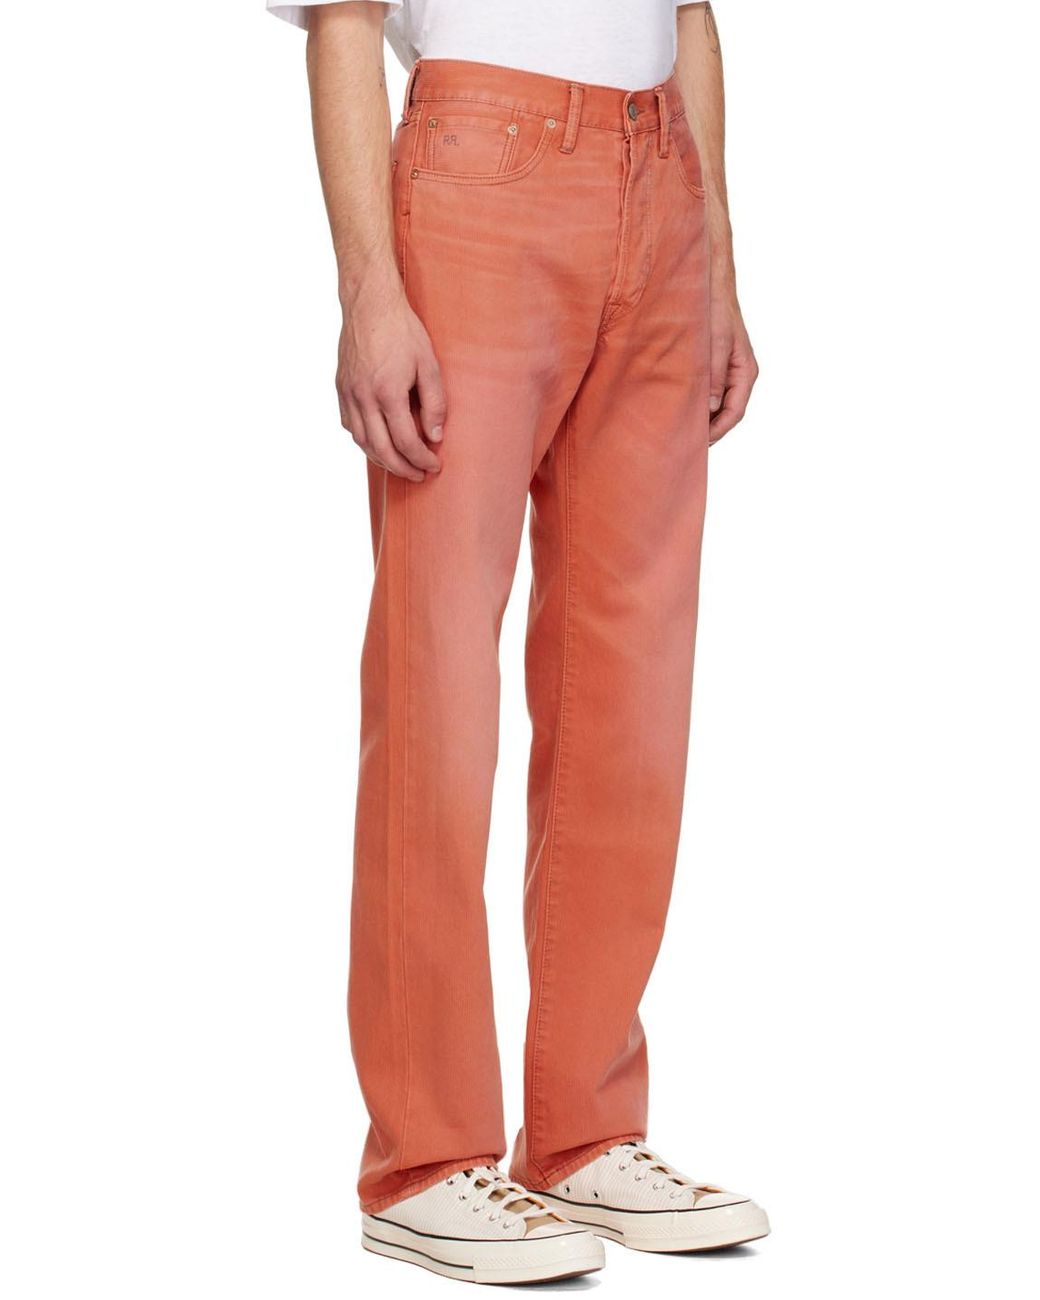 rrl FADED CORAL Orange Bedford Cord Trousers